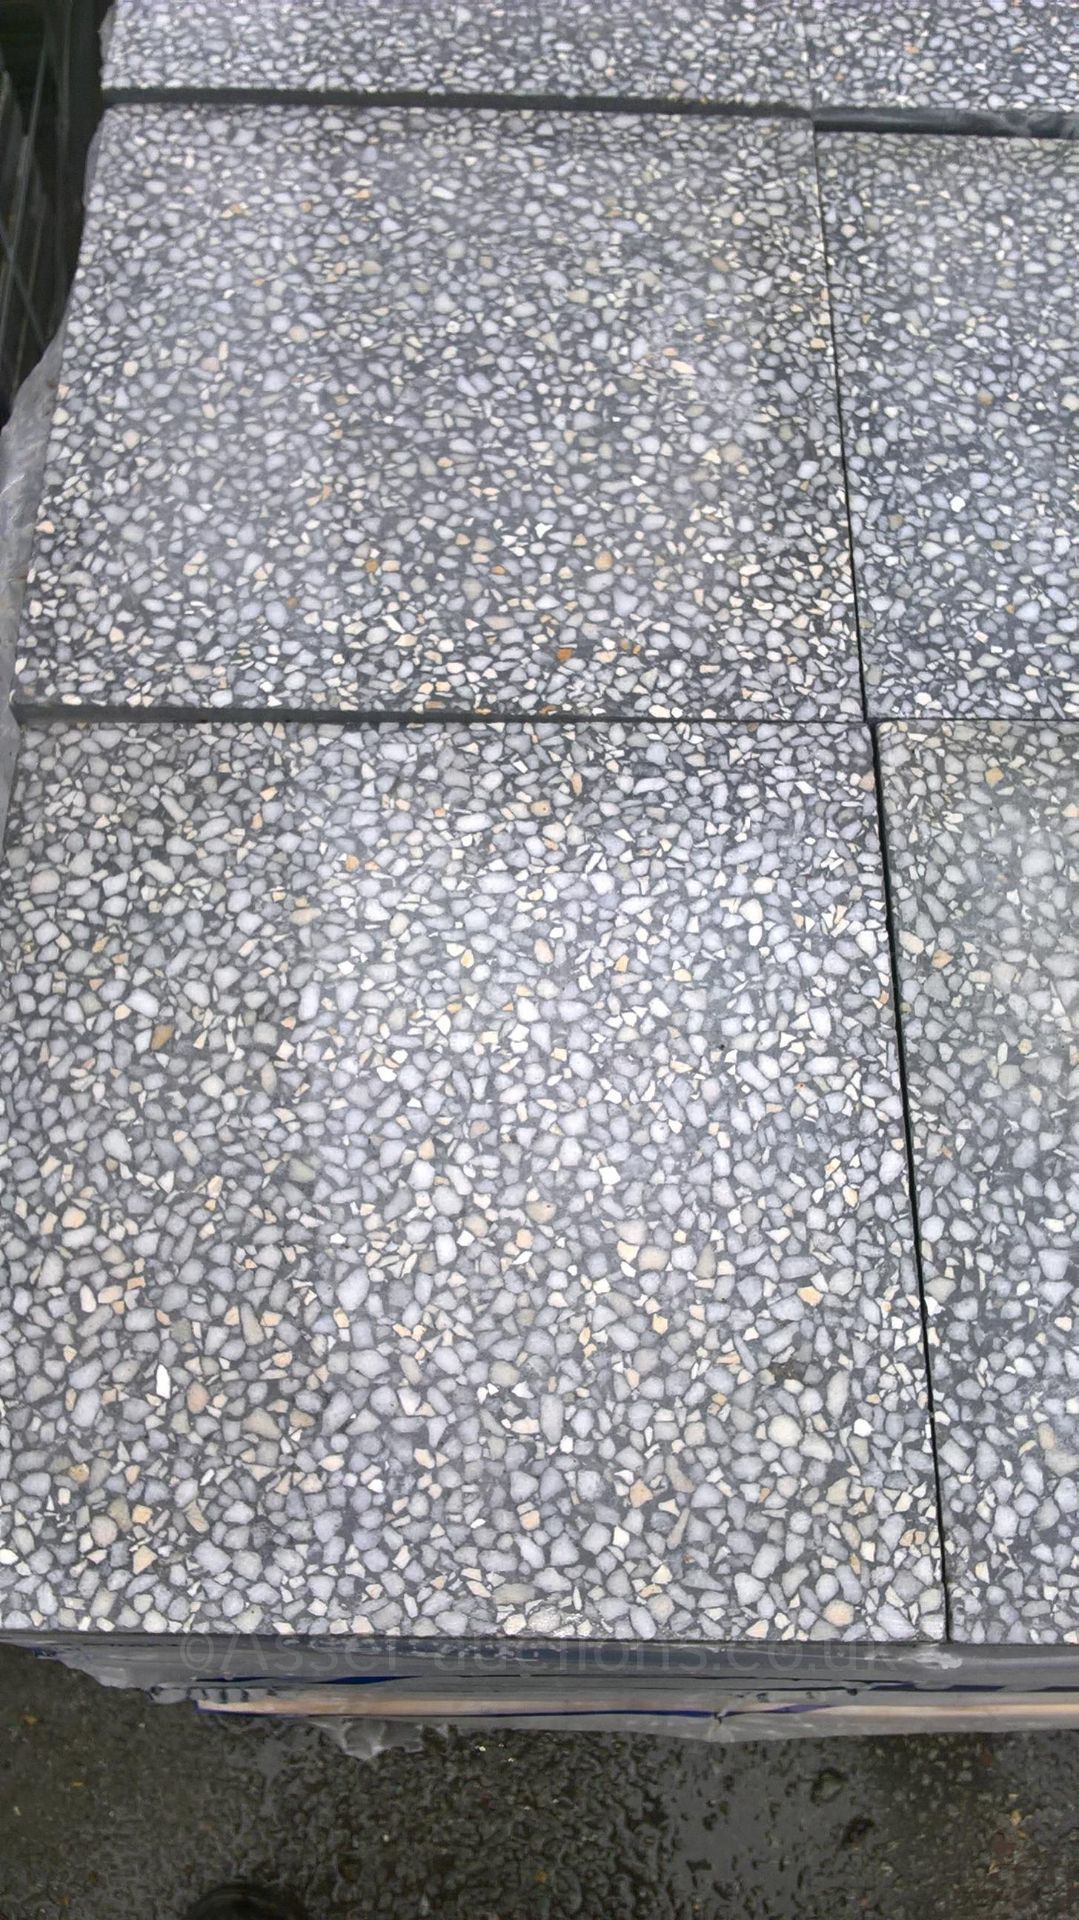 1 PALLET OF BRAND NEW GREY TERRAZZO COMMERCIAL TILES Z30099, COVERS 24 SQUARE YARDS *PLUS VAT* - Image 2 of 6